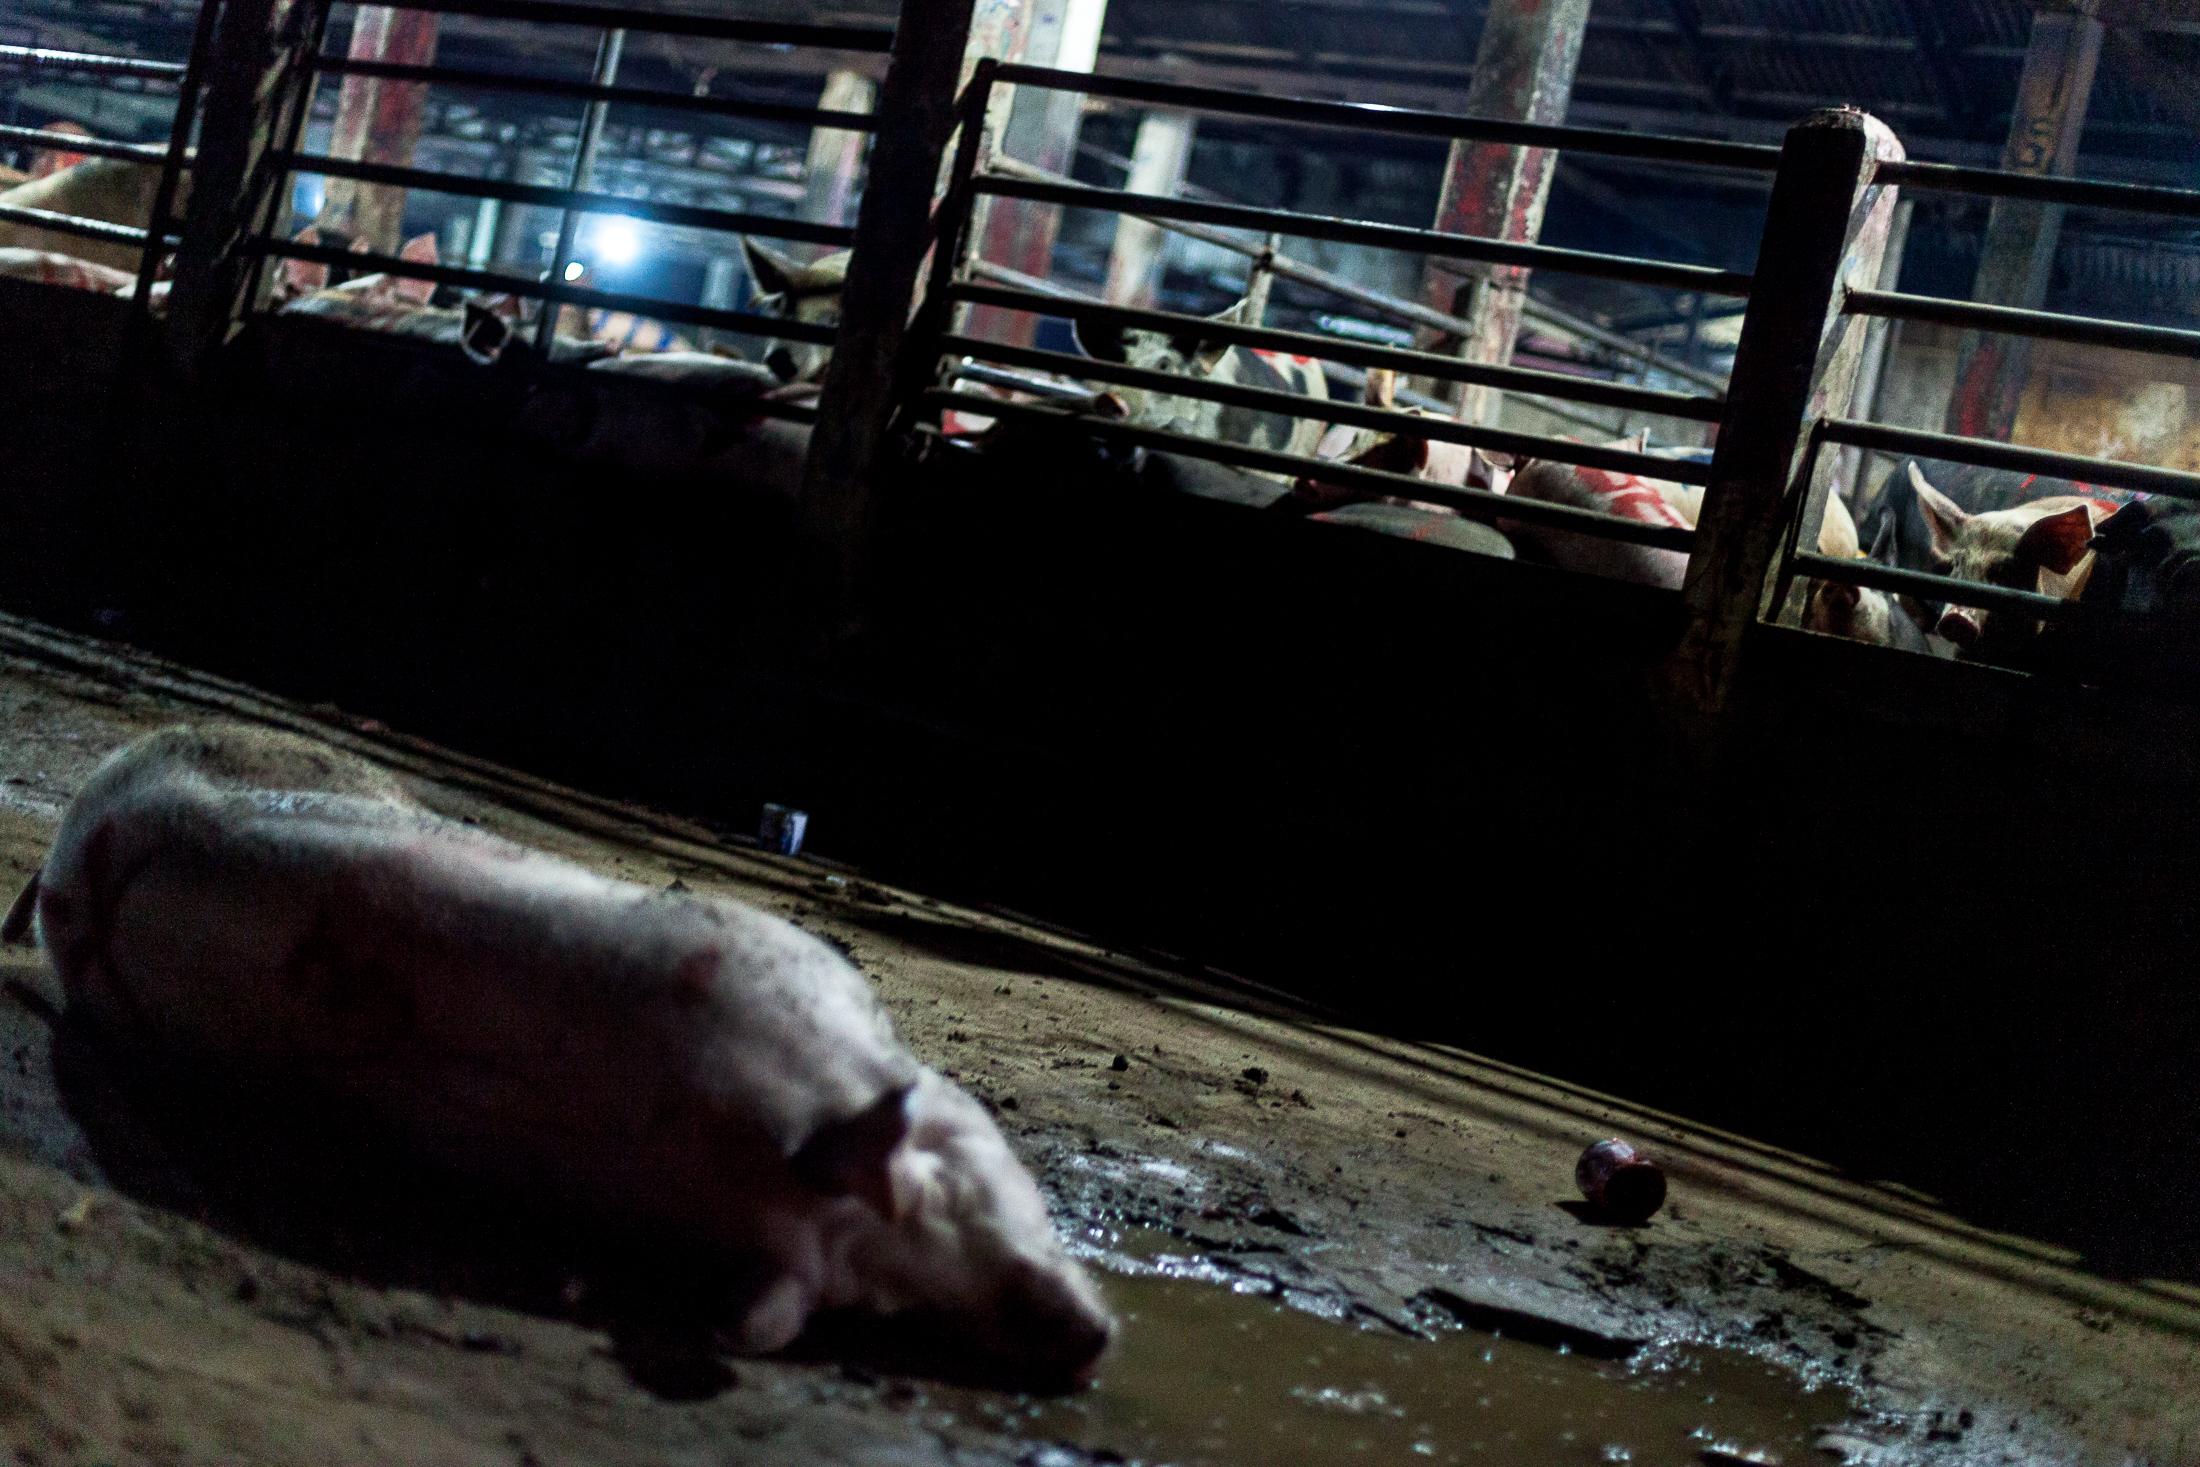 Inside a Cambodian Slaughterhouse - SIEM REAP, CAMBODIA - FEBRUARY 22: A dead pig is seen on...